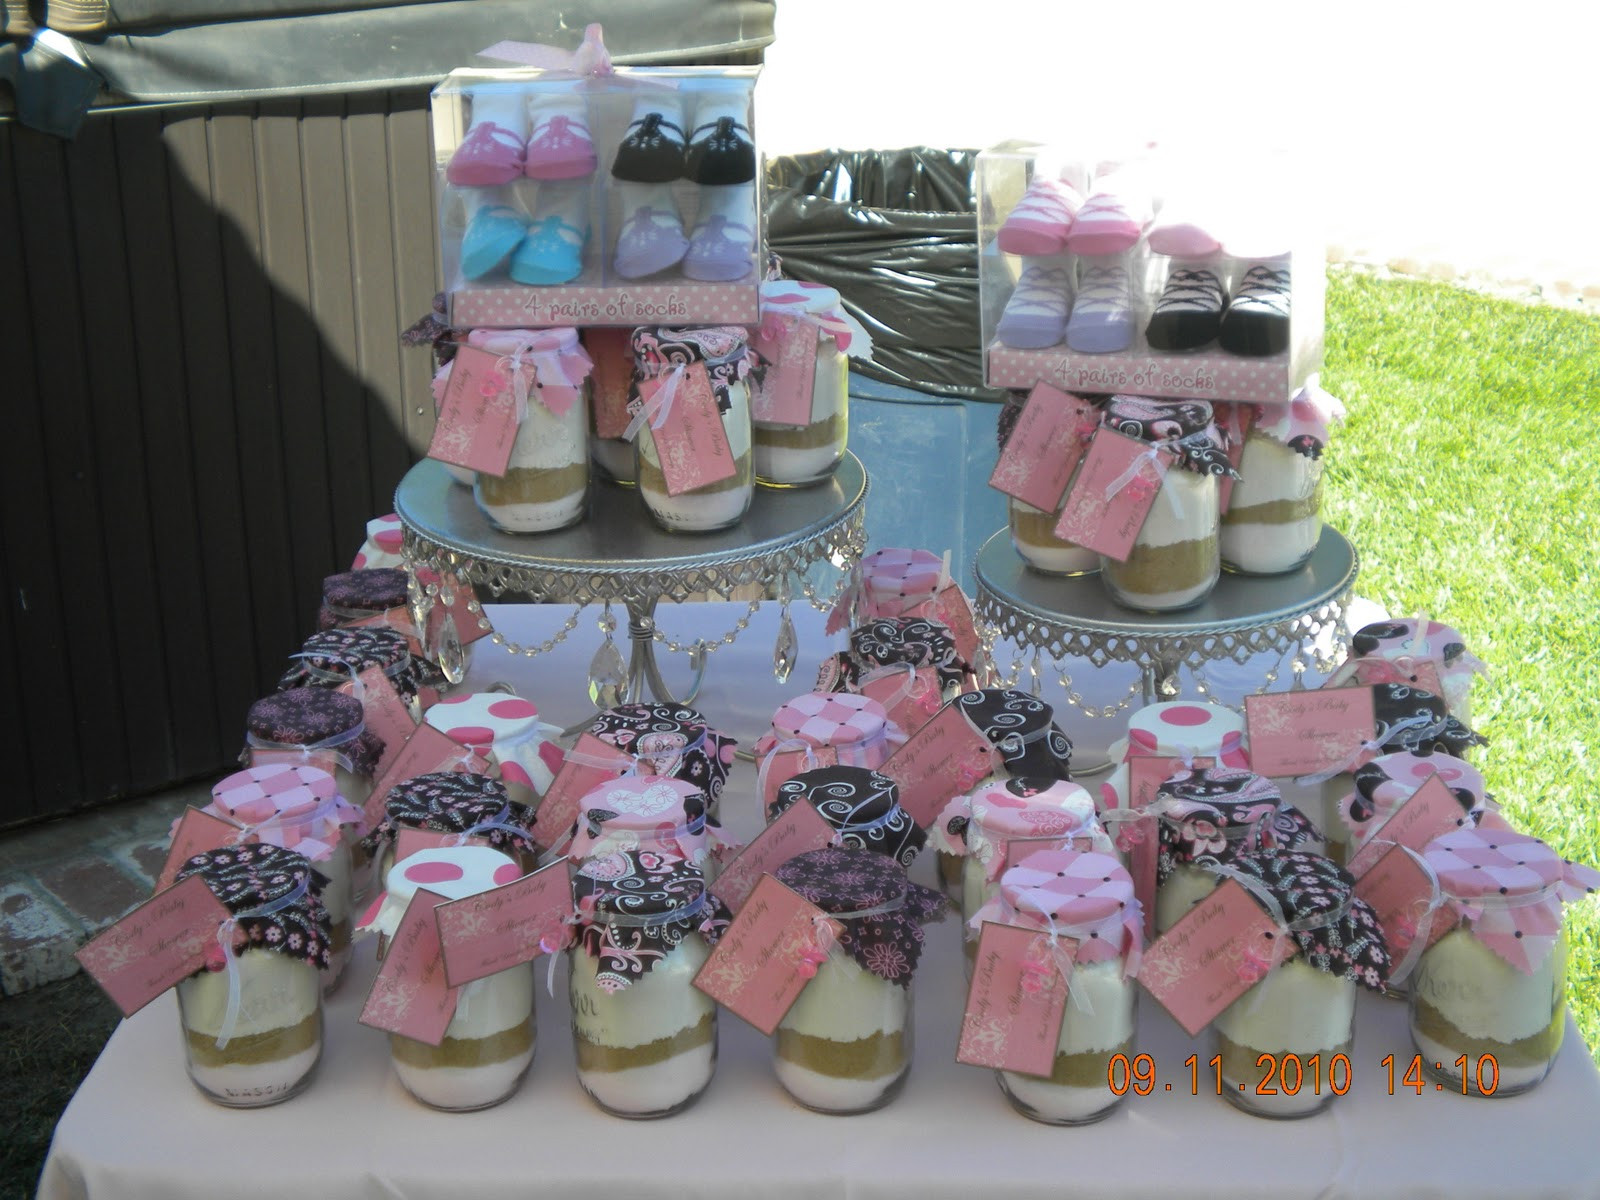 Gift Ideas For Guests At Baby Shower
 Happily Ever After Designs Pink and Brown Baby Shower